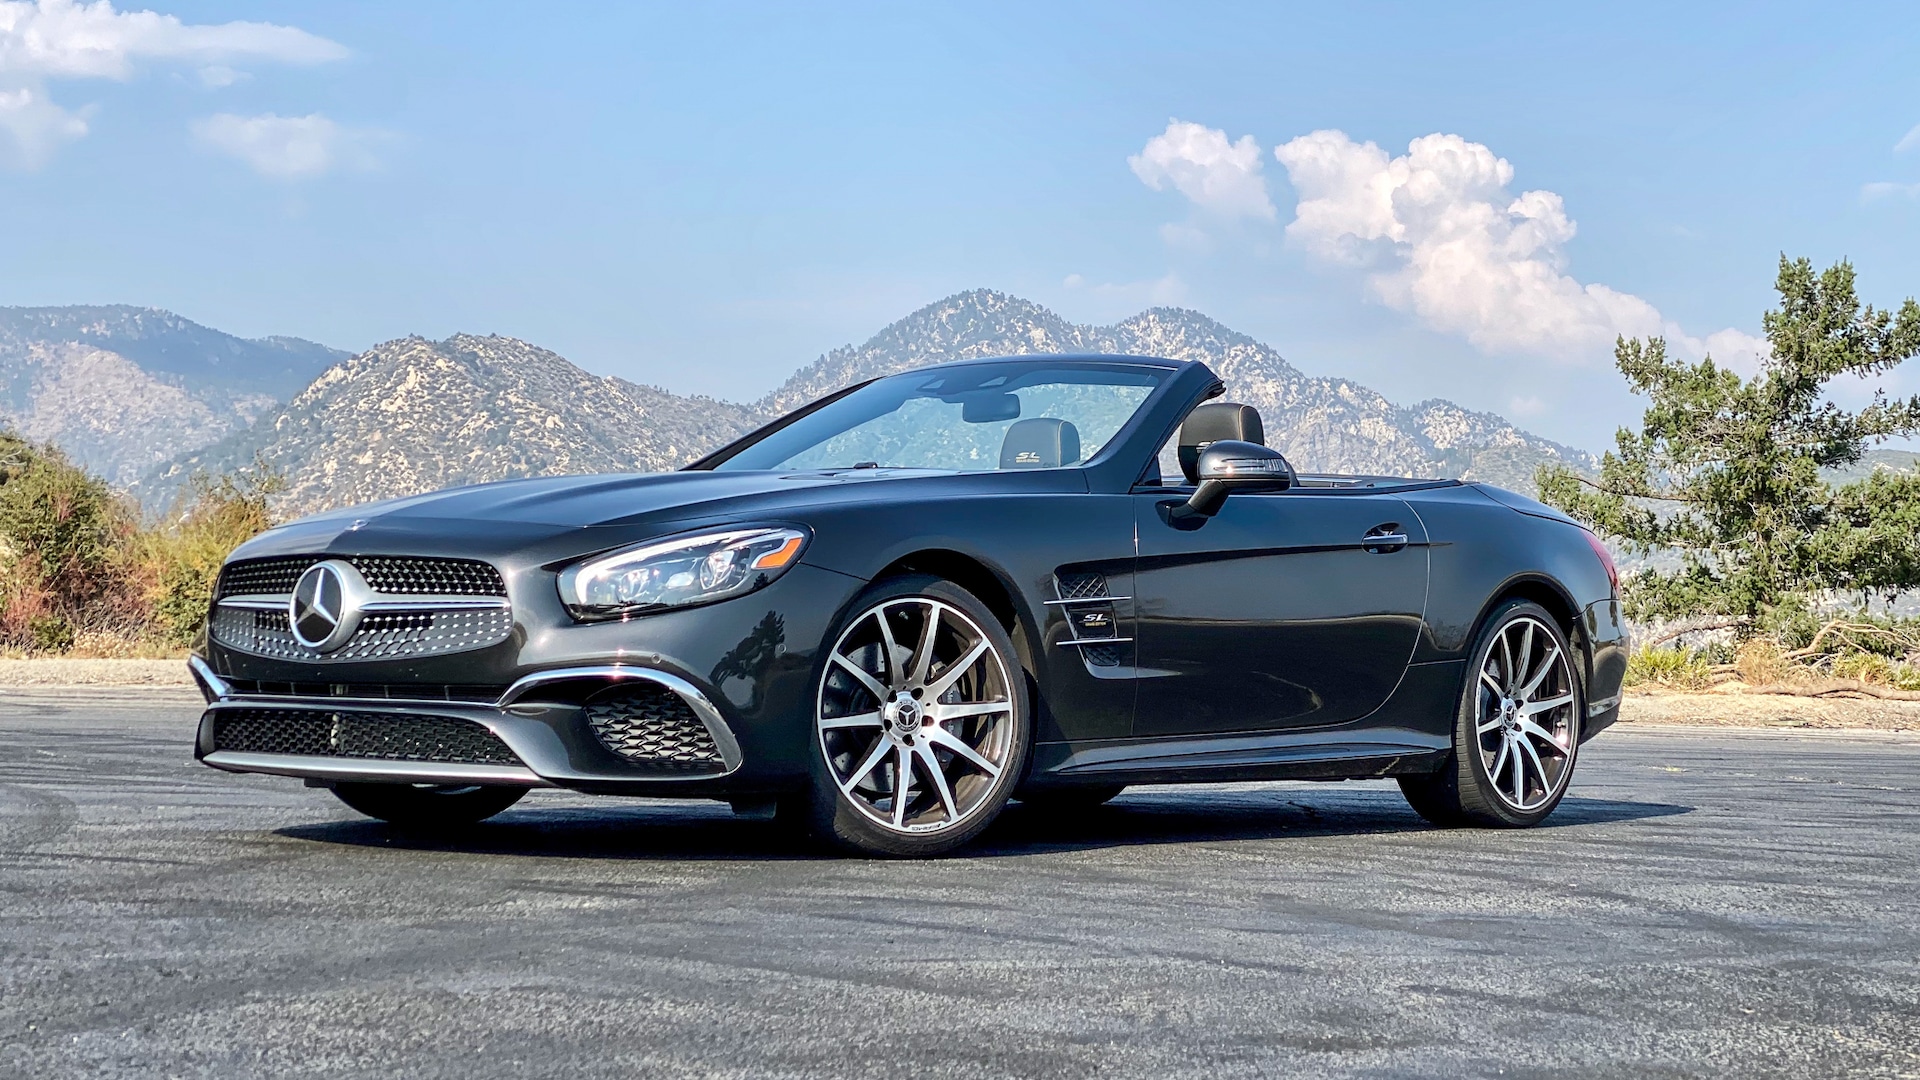 Last of a Masterclass: We Test the 2020 Mercedes-Benz SL550 Grand Edition